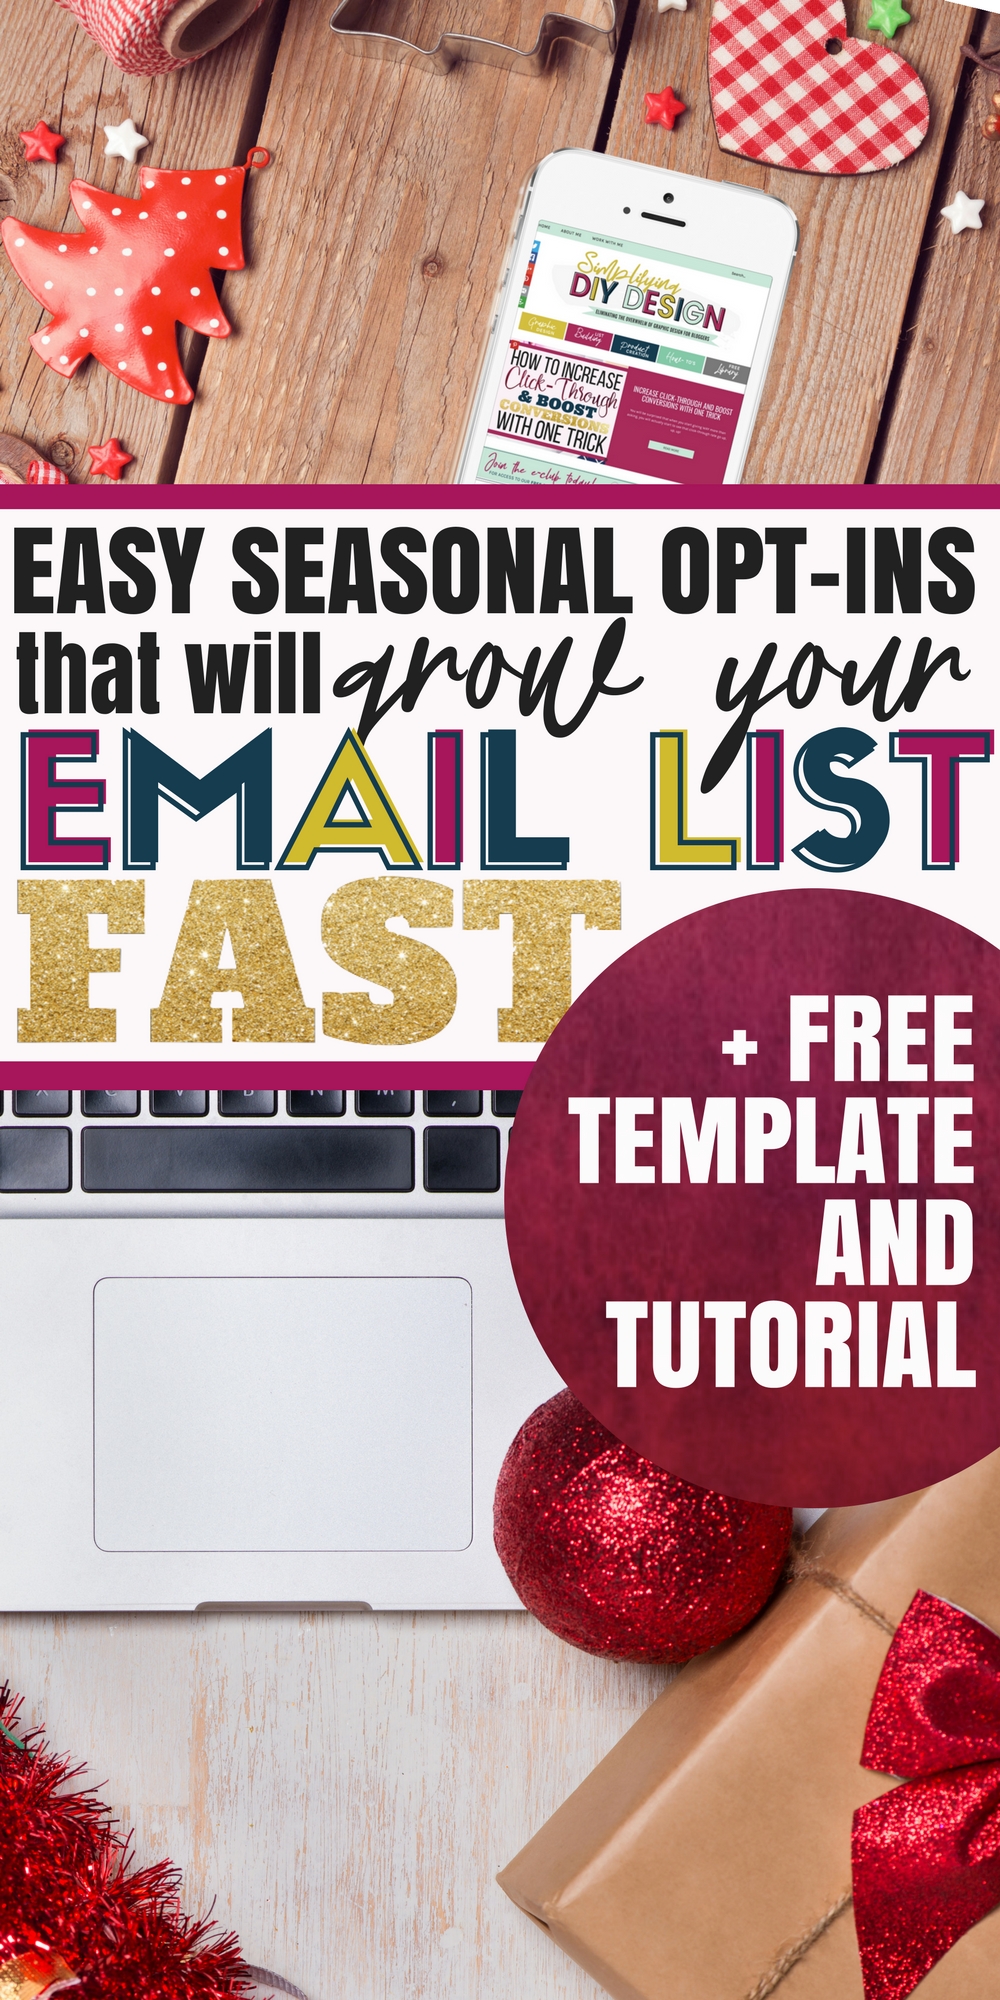 Holiday marketing can be a huge opportunity to grow your email list and your income! Here are some ideas for opt ins you can design to boost your email list! Your business will thank you for these tips!